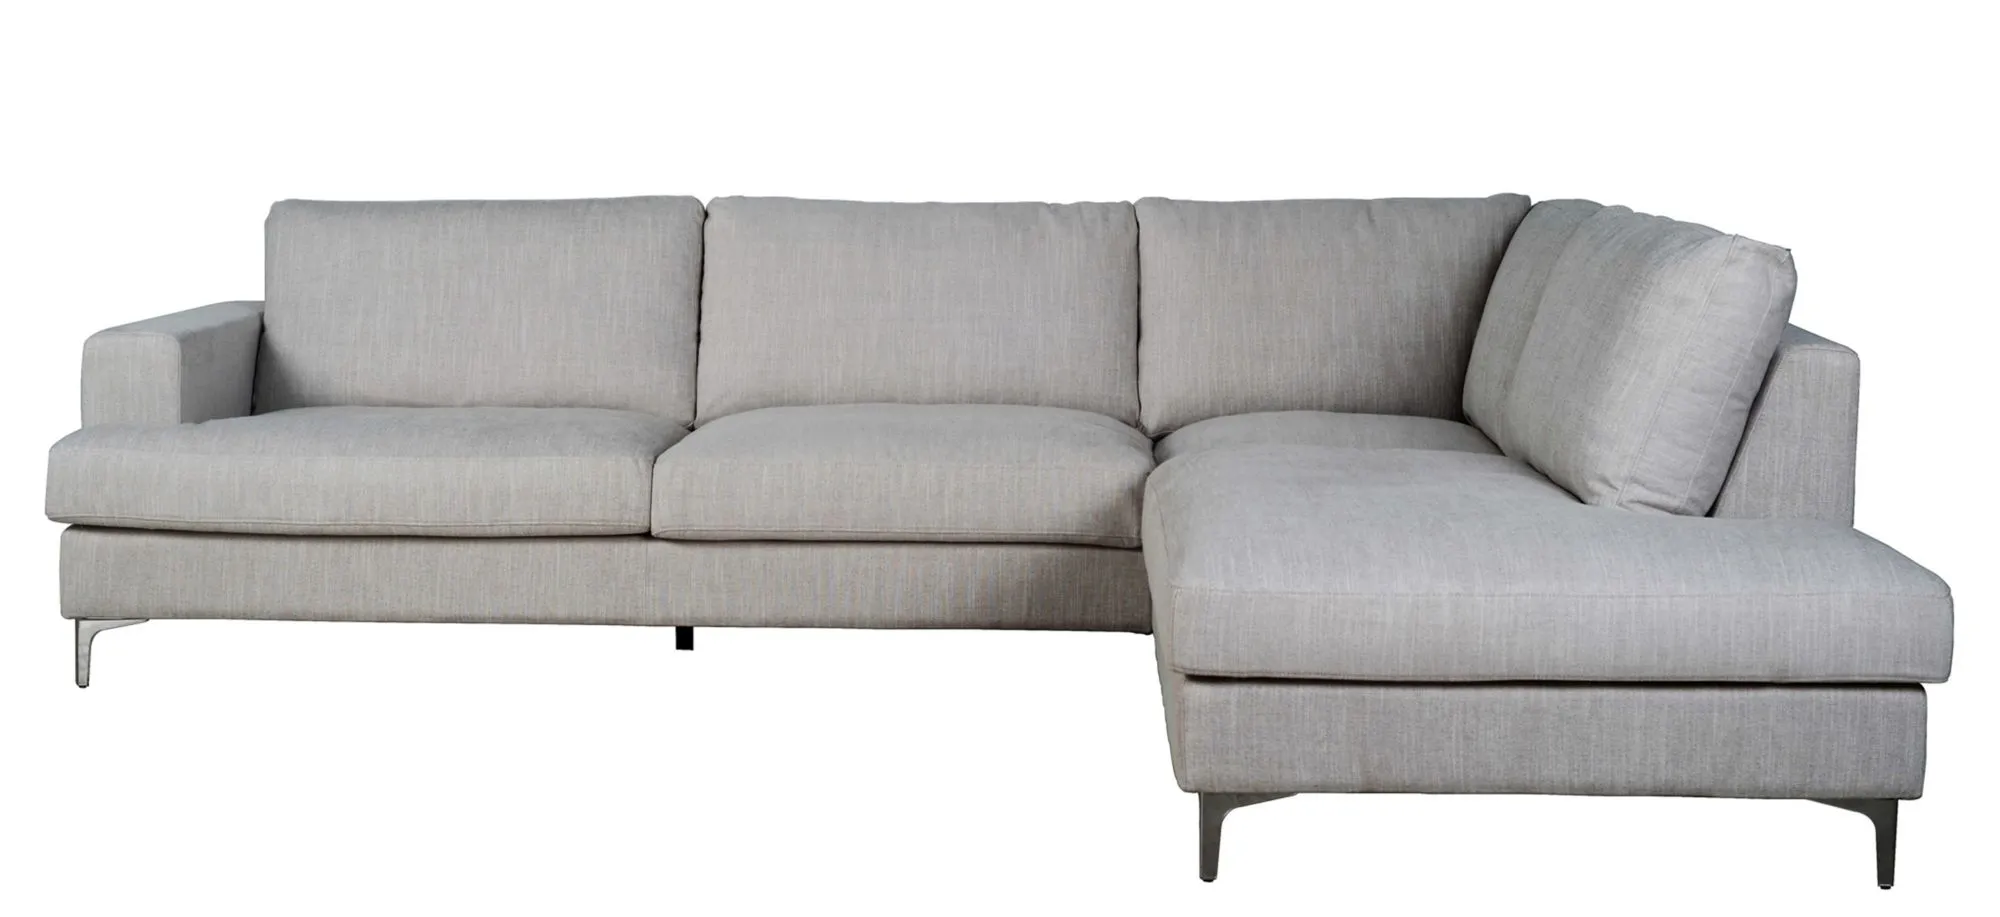 Feather 3-pc. Sectional Sofa in Dovetail Linen by LH Imports Ltd